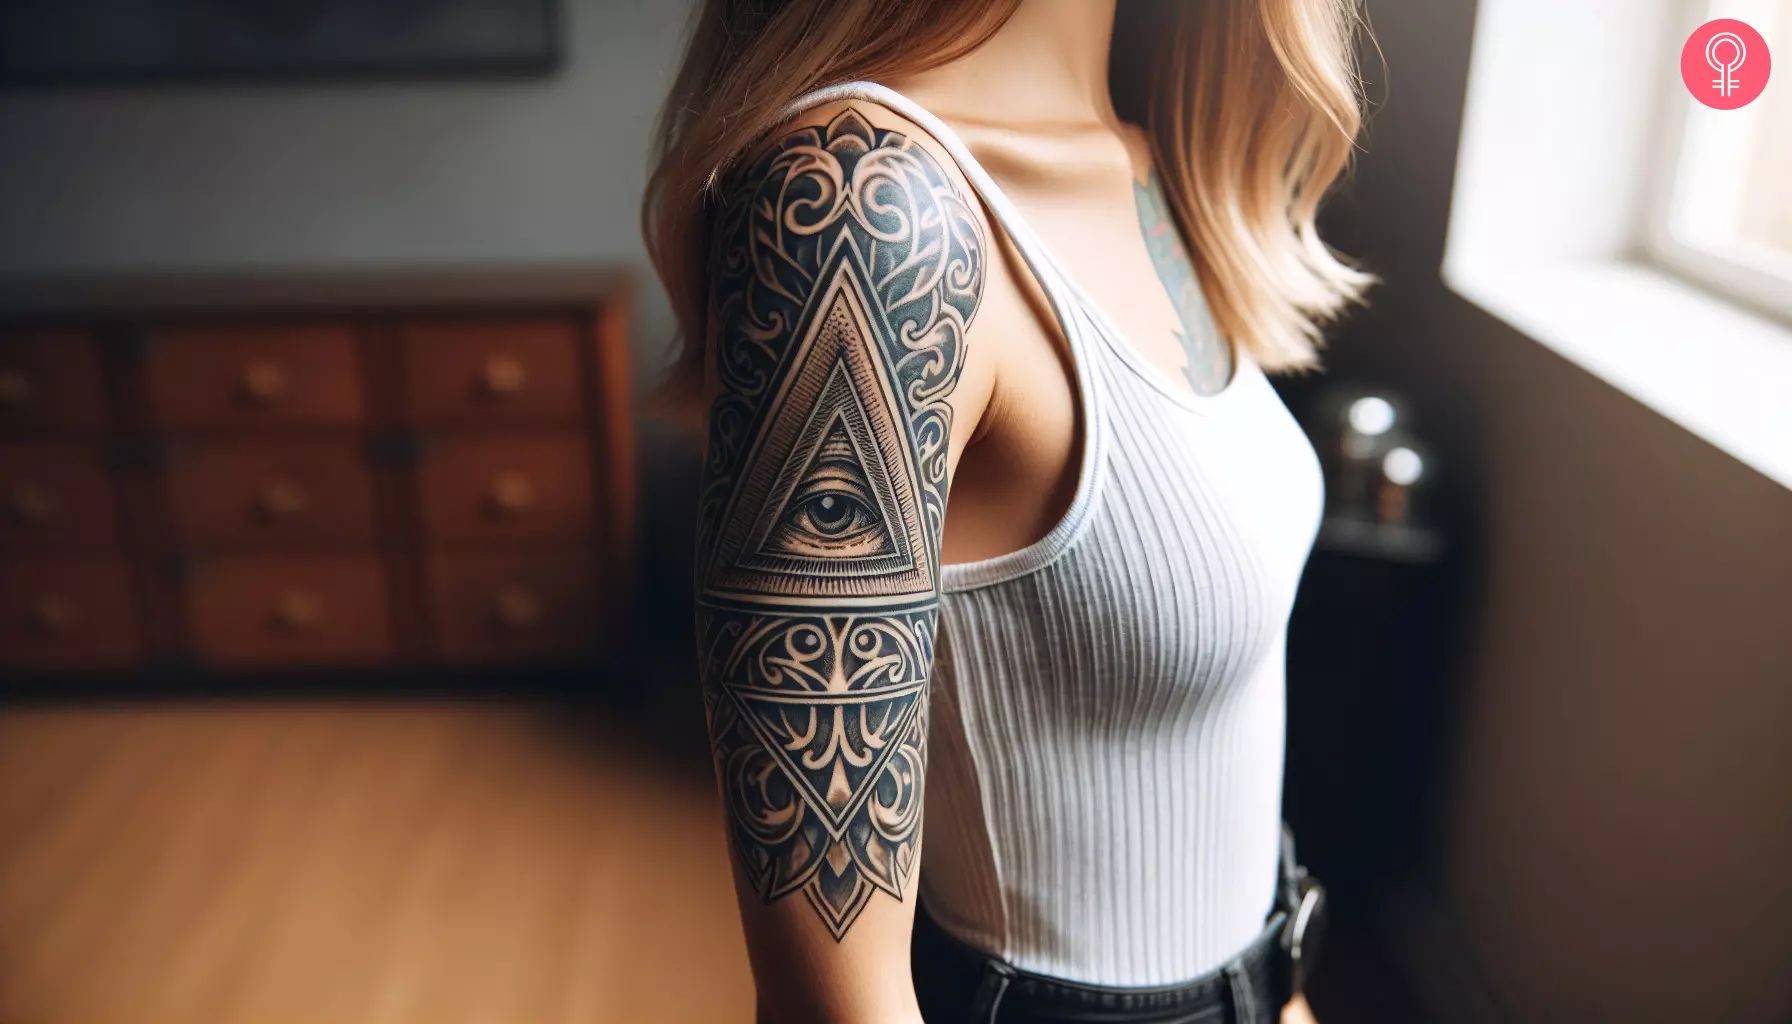 A woman with the Illuminati triangle tattoo on her upper arm